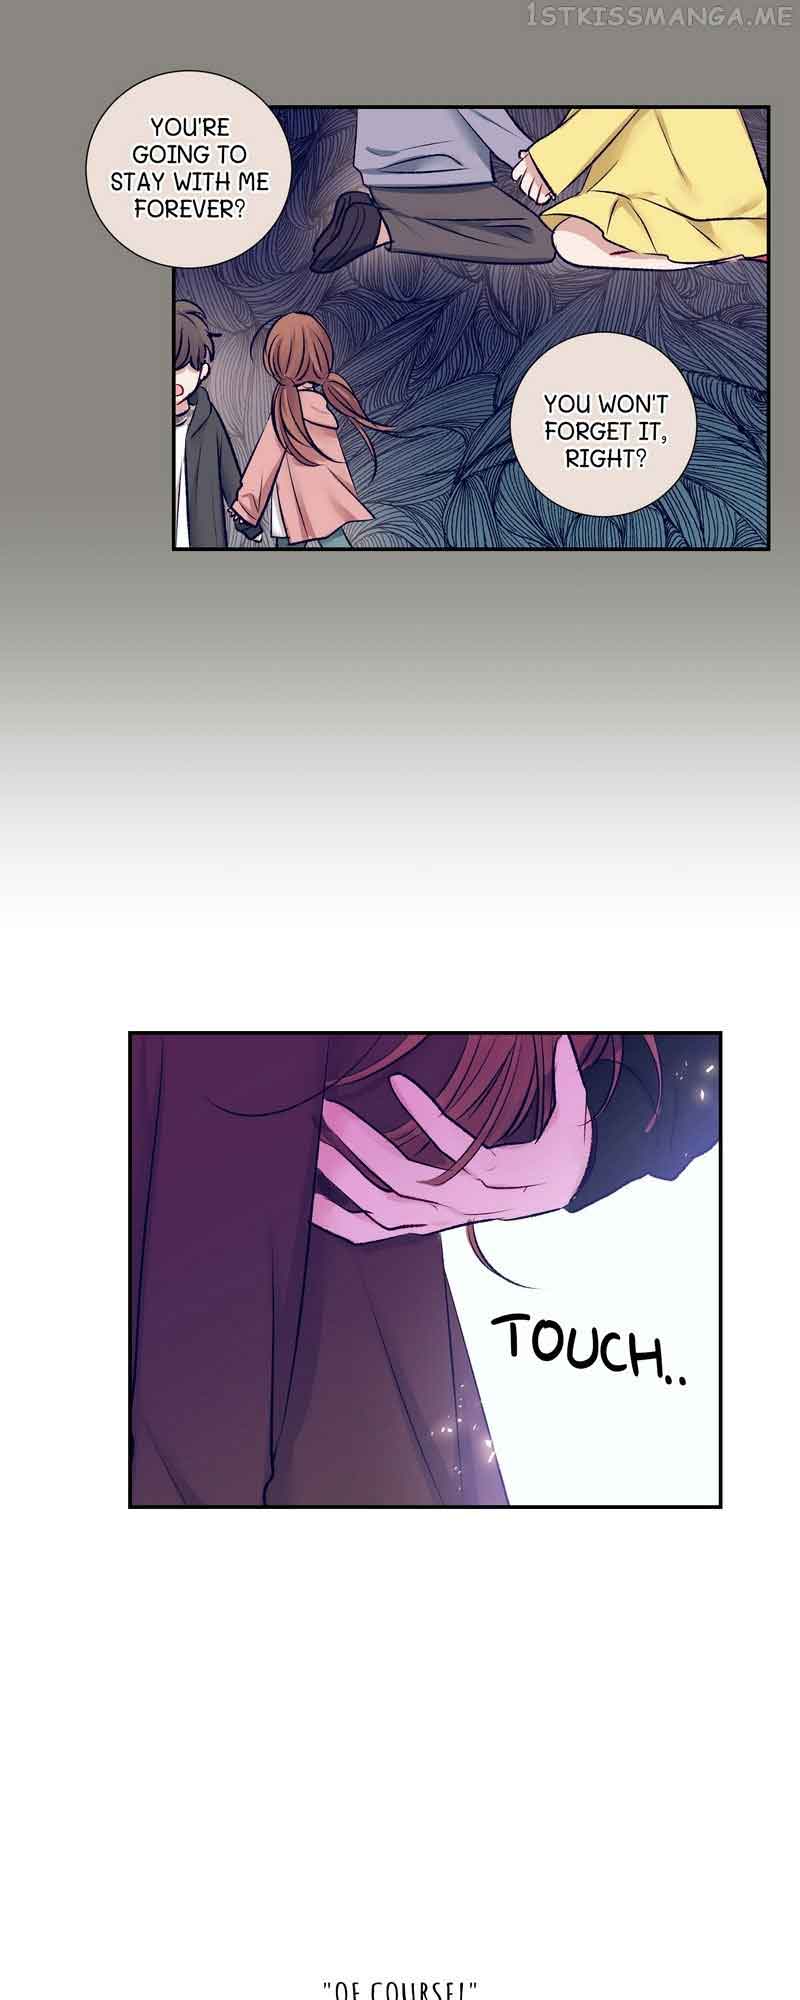 The Touch of Your Magic chapter 89